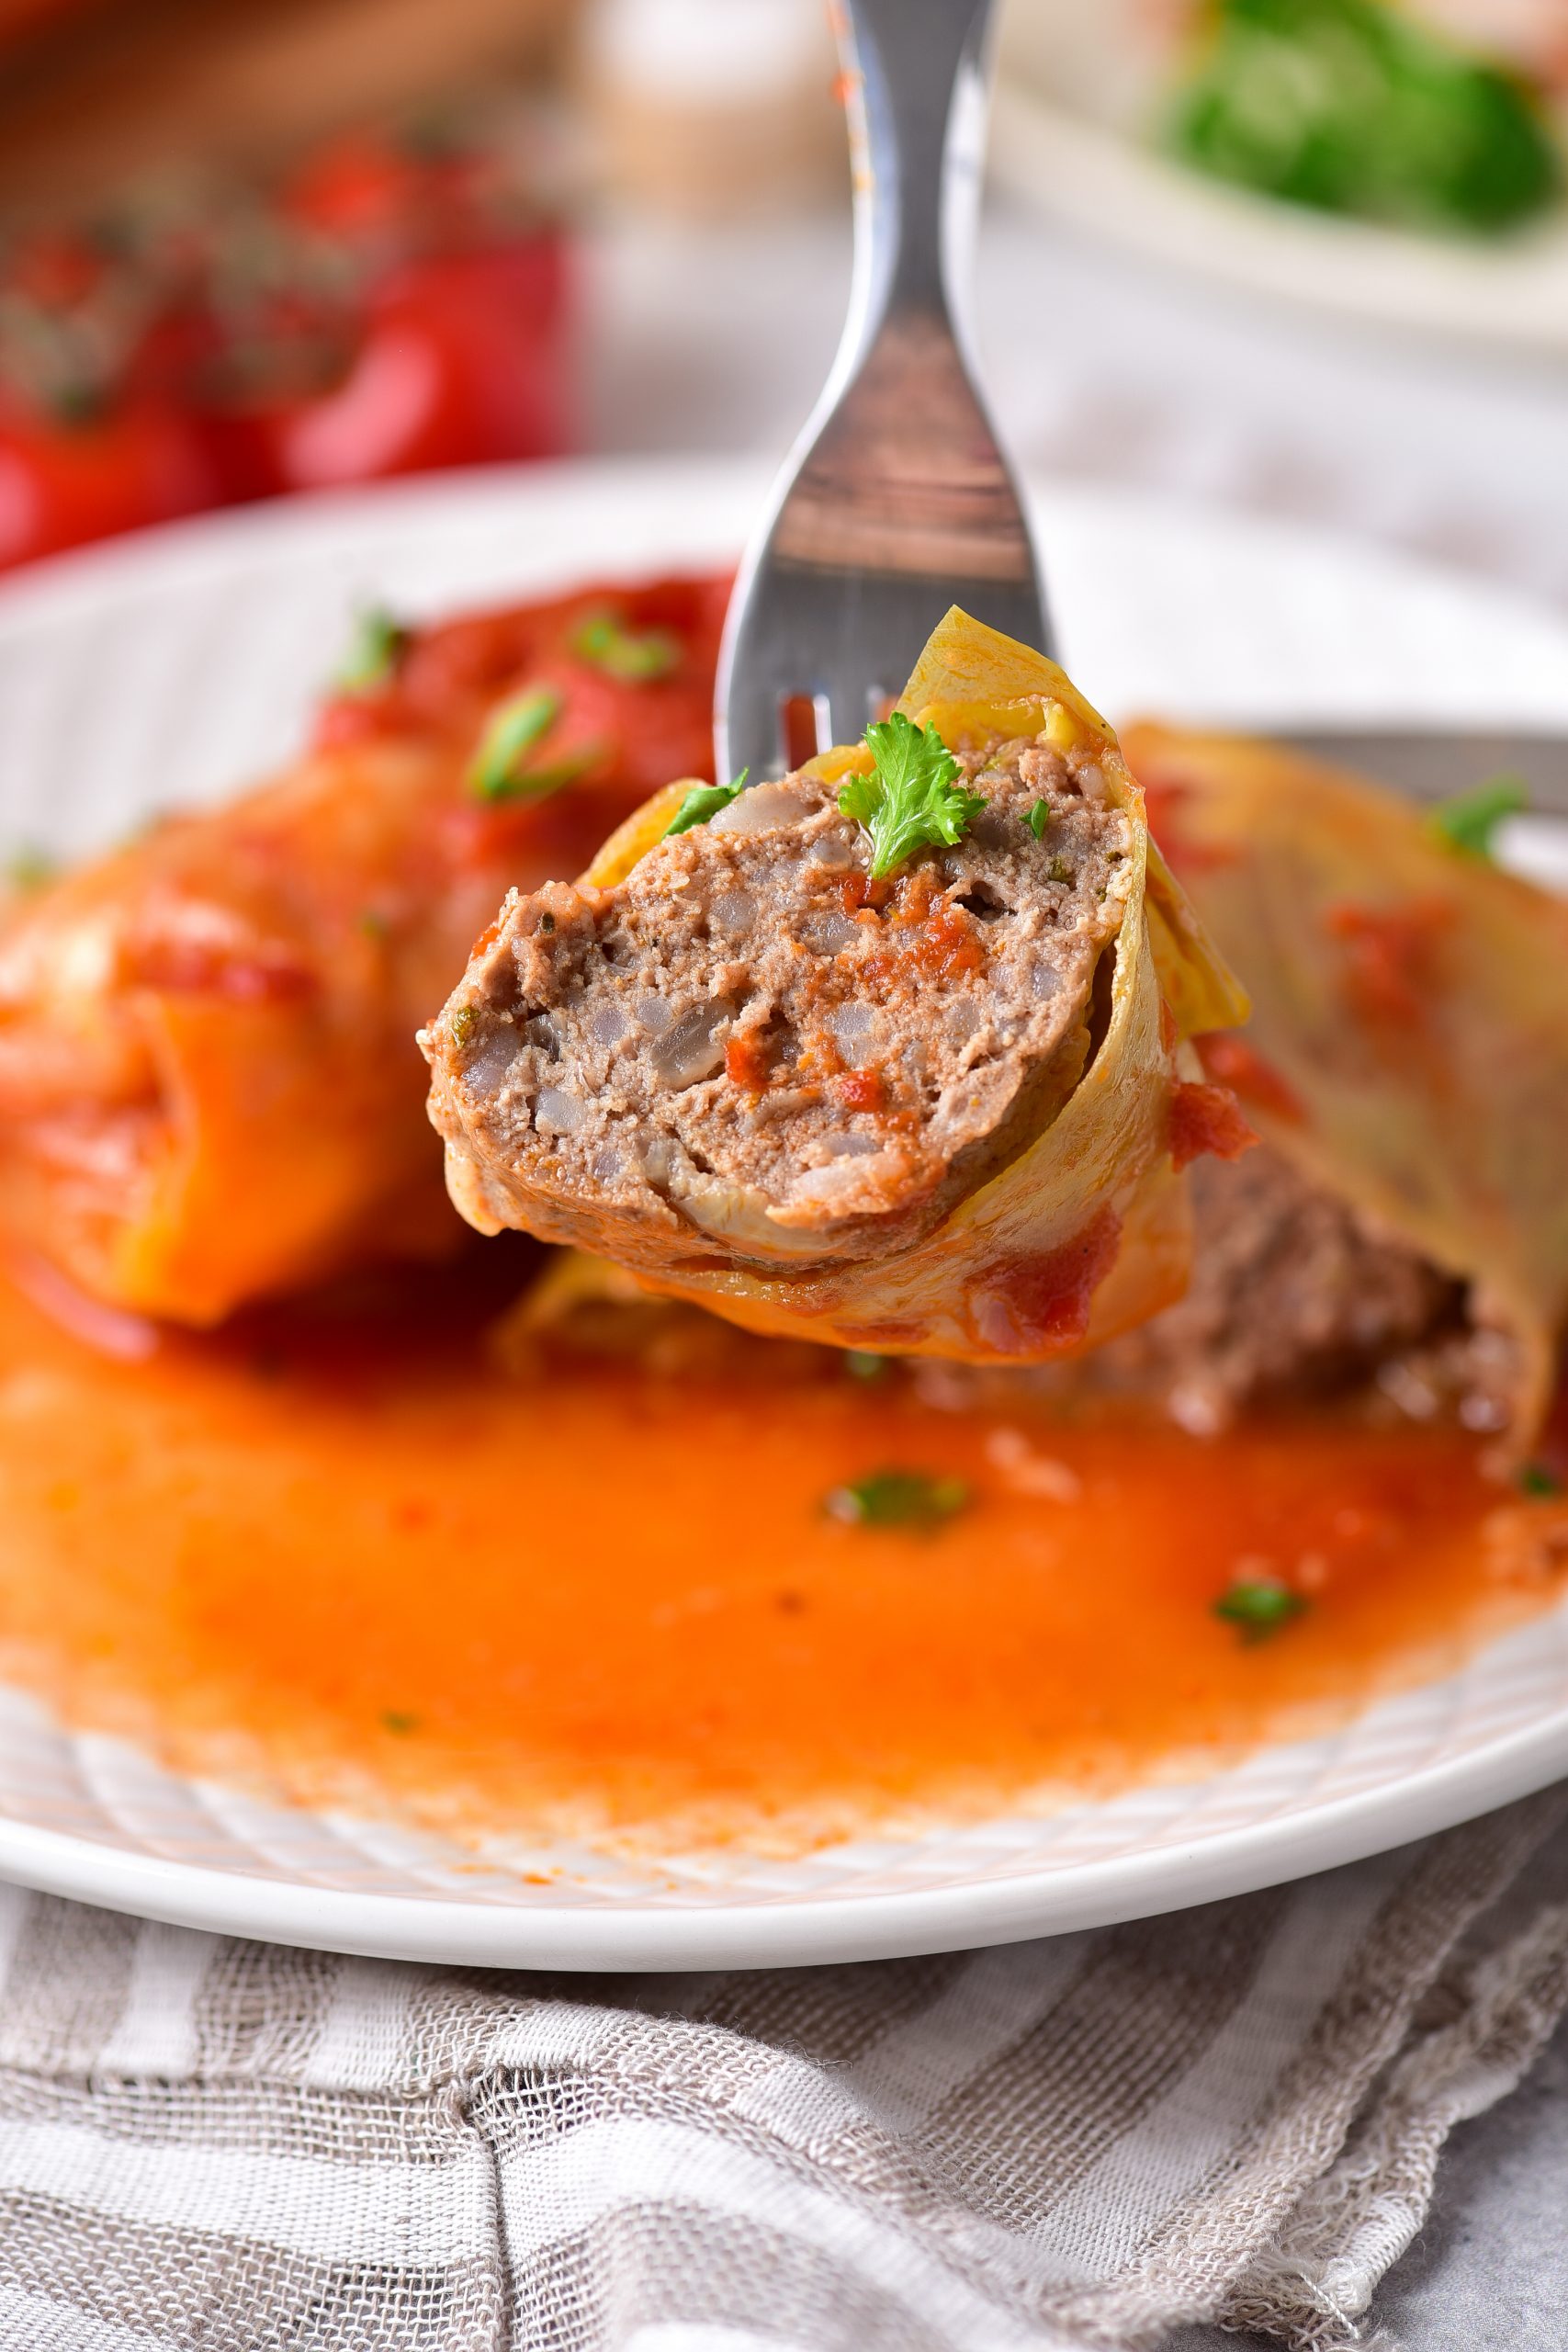 Stuffed Cabbage Rolls with Tomato Sauce, stuffed cabbage rolls, stuffed cabbage rolls recipe, how to make stuffed cabbage rolls